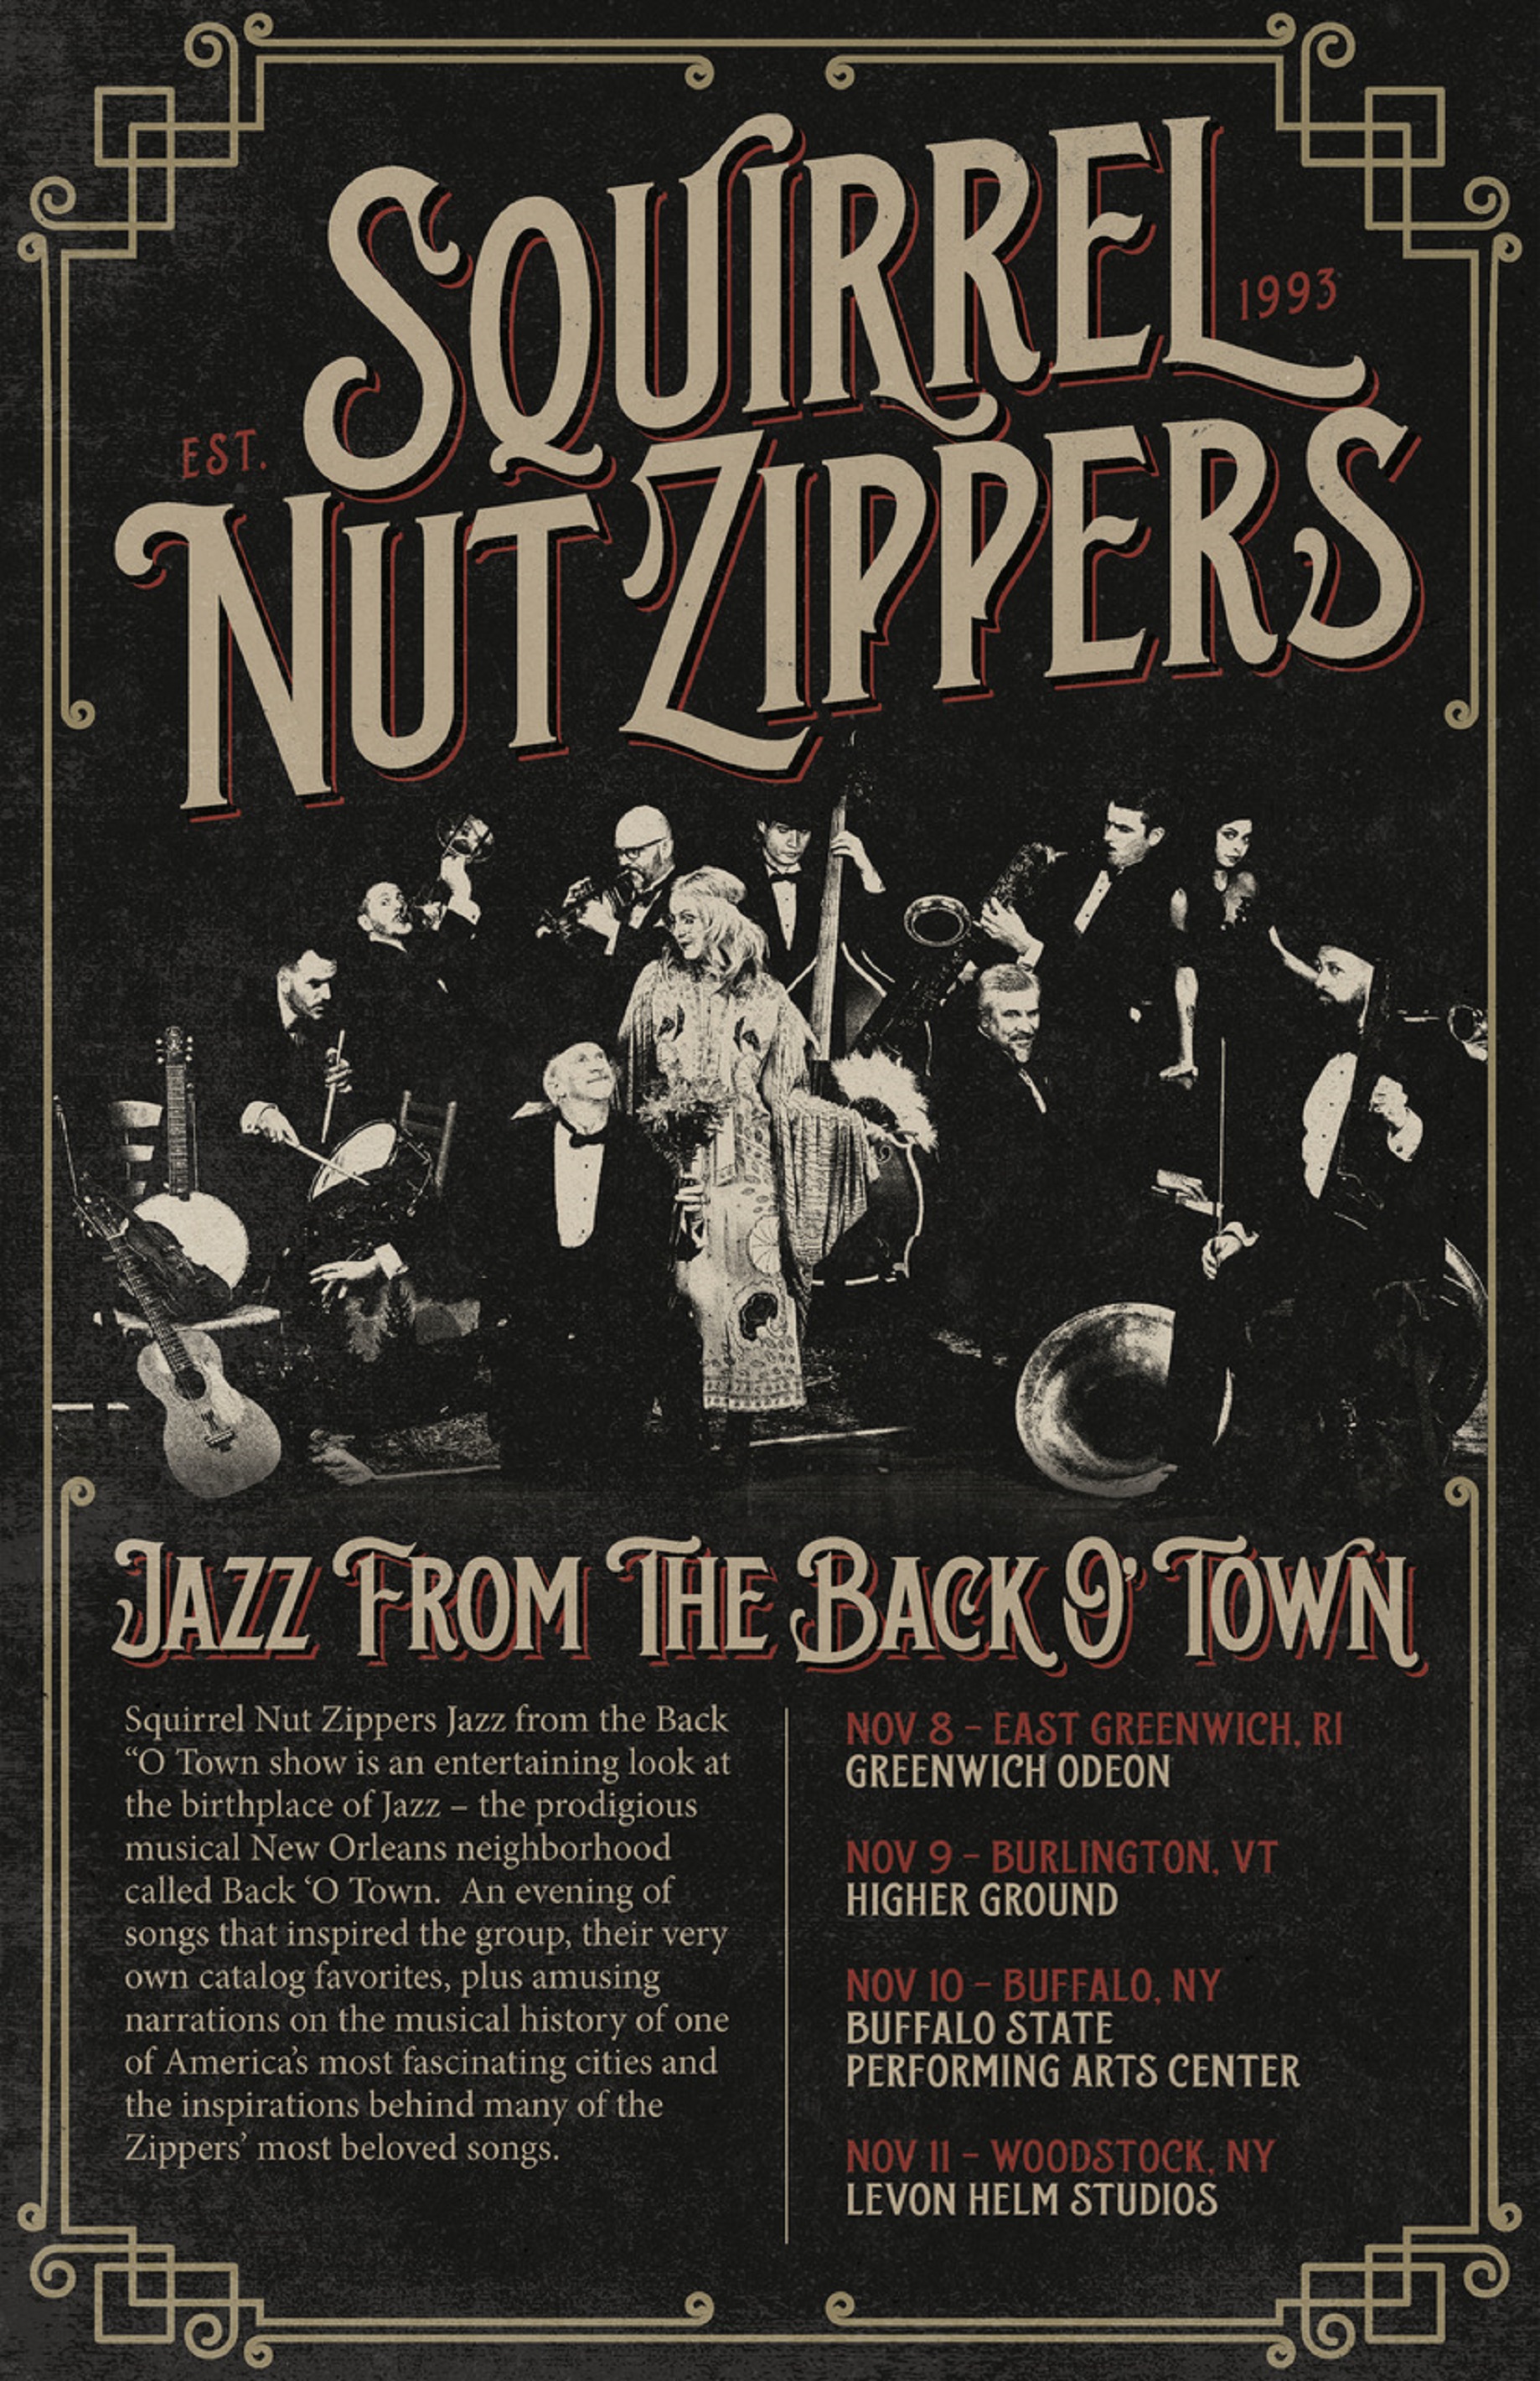 Venerable Jazz Rockers Squirrel Nut Zippers to Take Fans on a Musical Journey to the Birthplace of Jazz with Special Run of “Jazz from the Back O’ Town” Shows